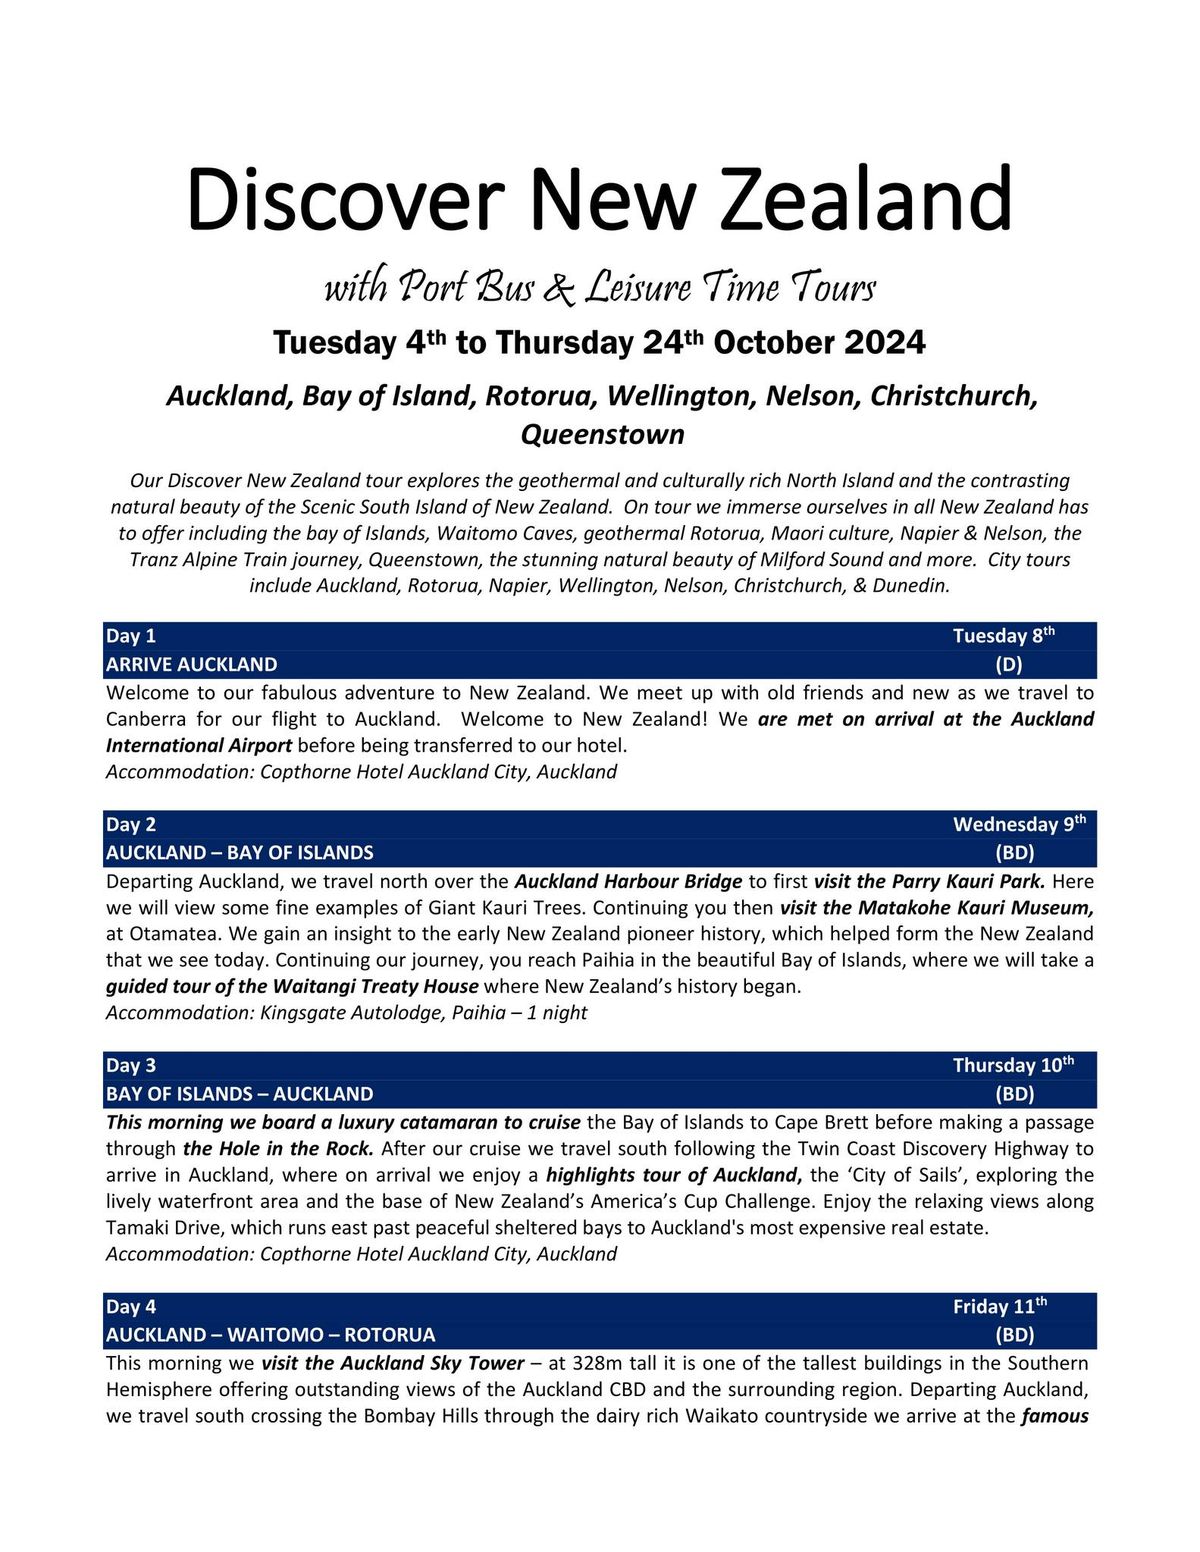 Discover New Zealand with Port Bus & Leisure Time Tours